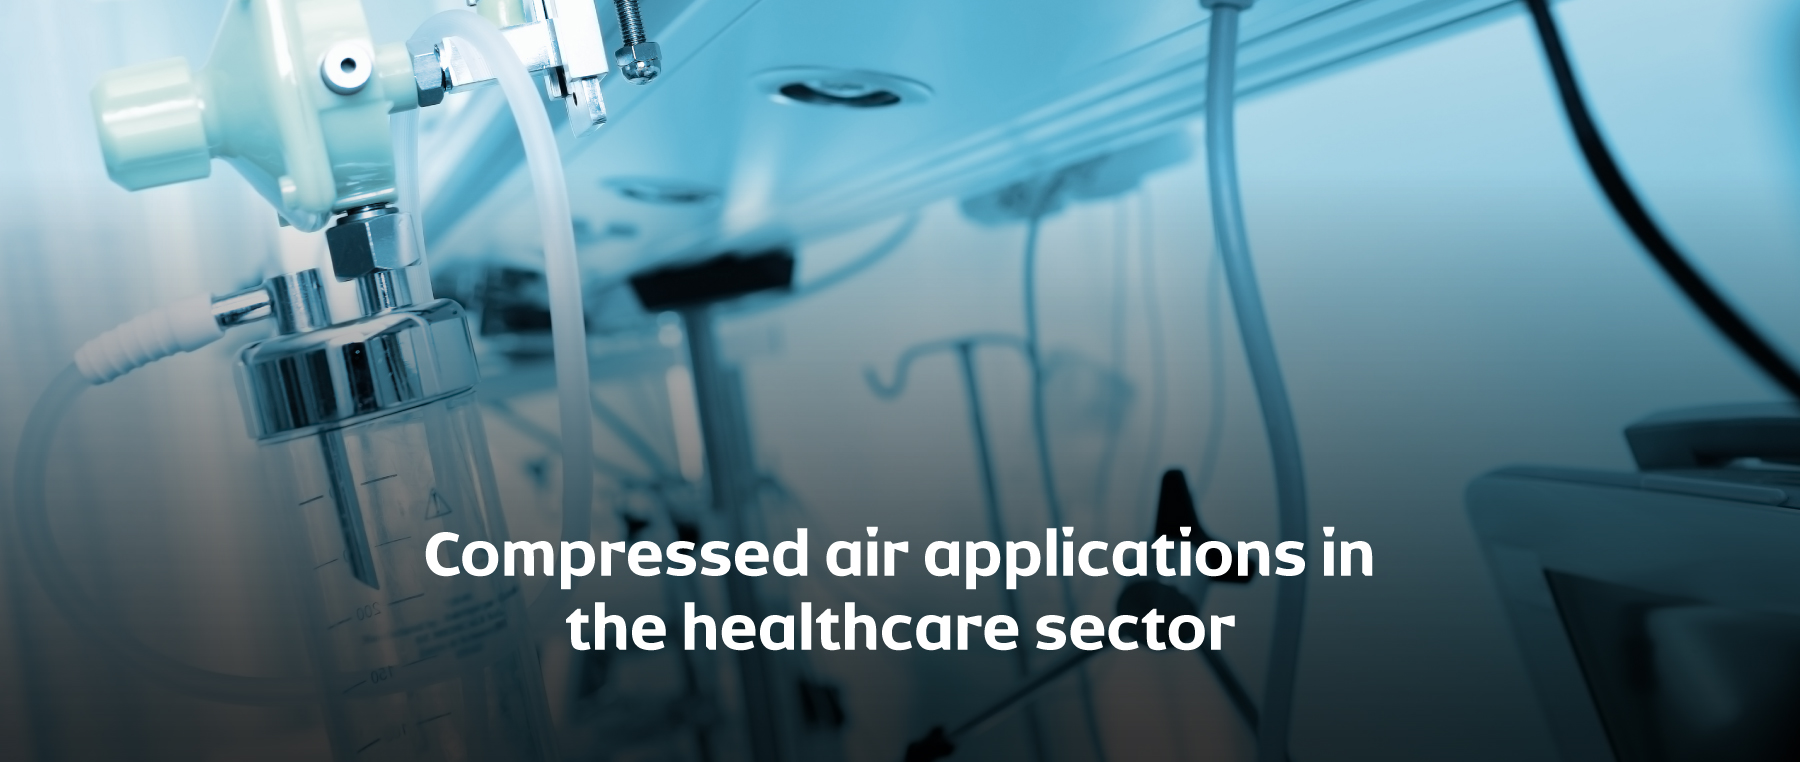 Compressed air applications in the healthcare sector